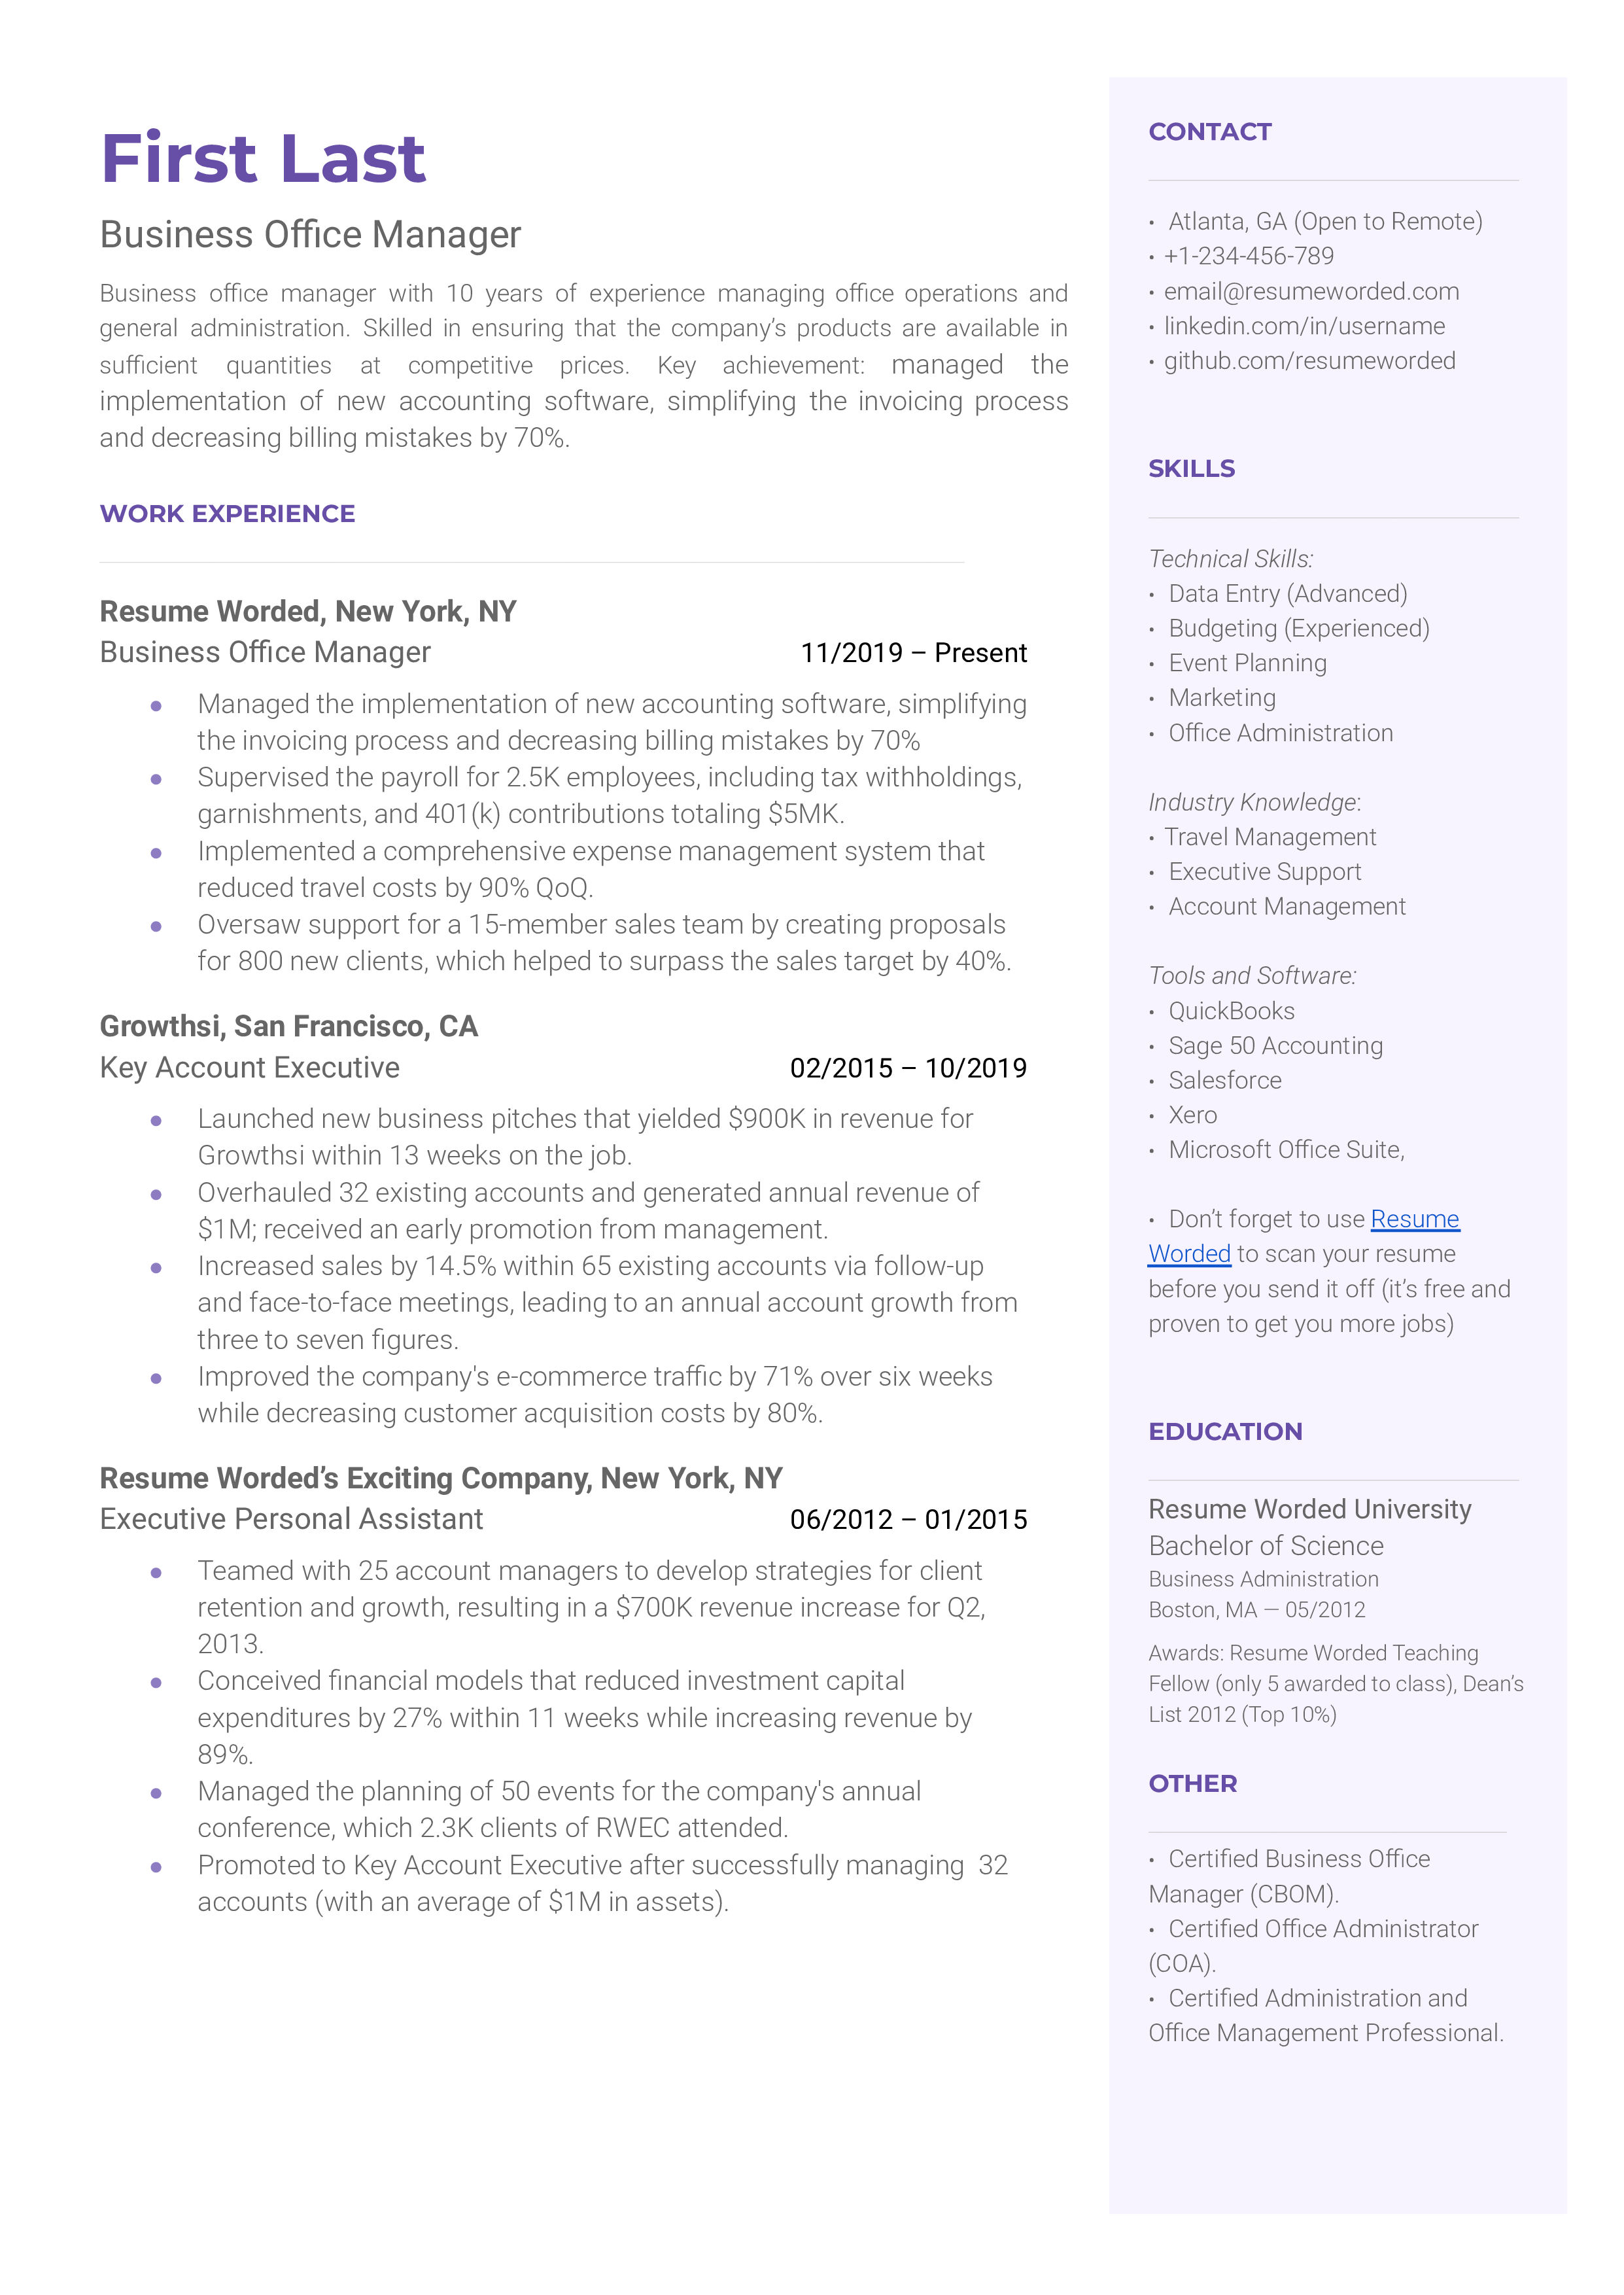 Business Office Manager Resume Sample